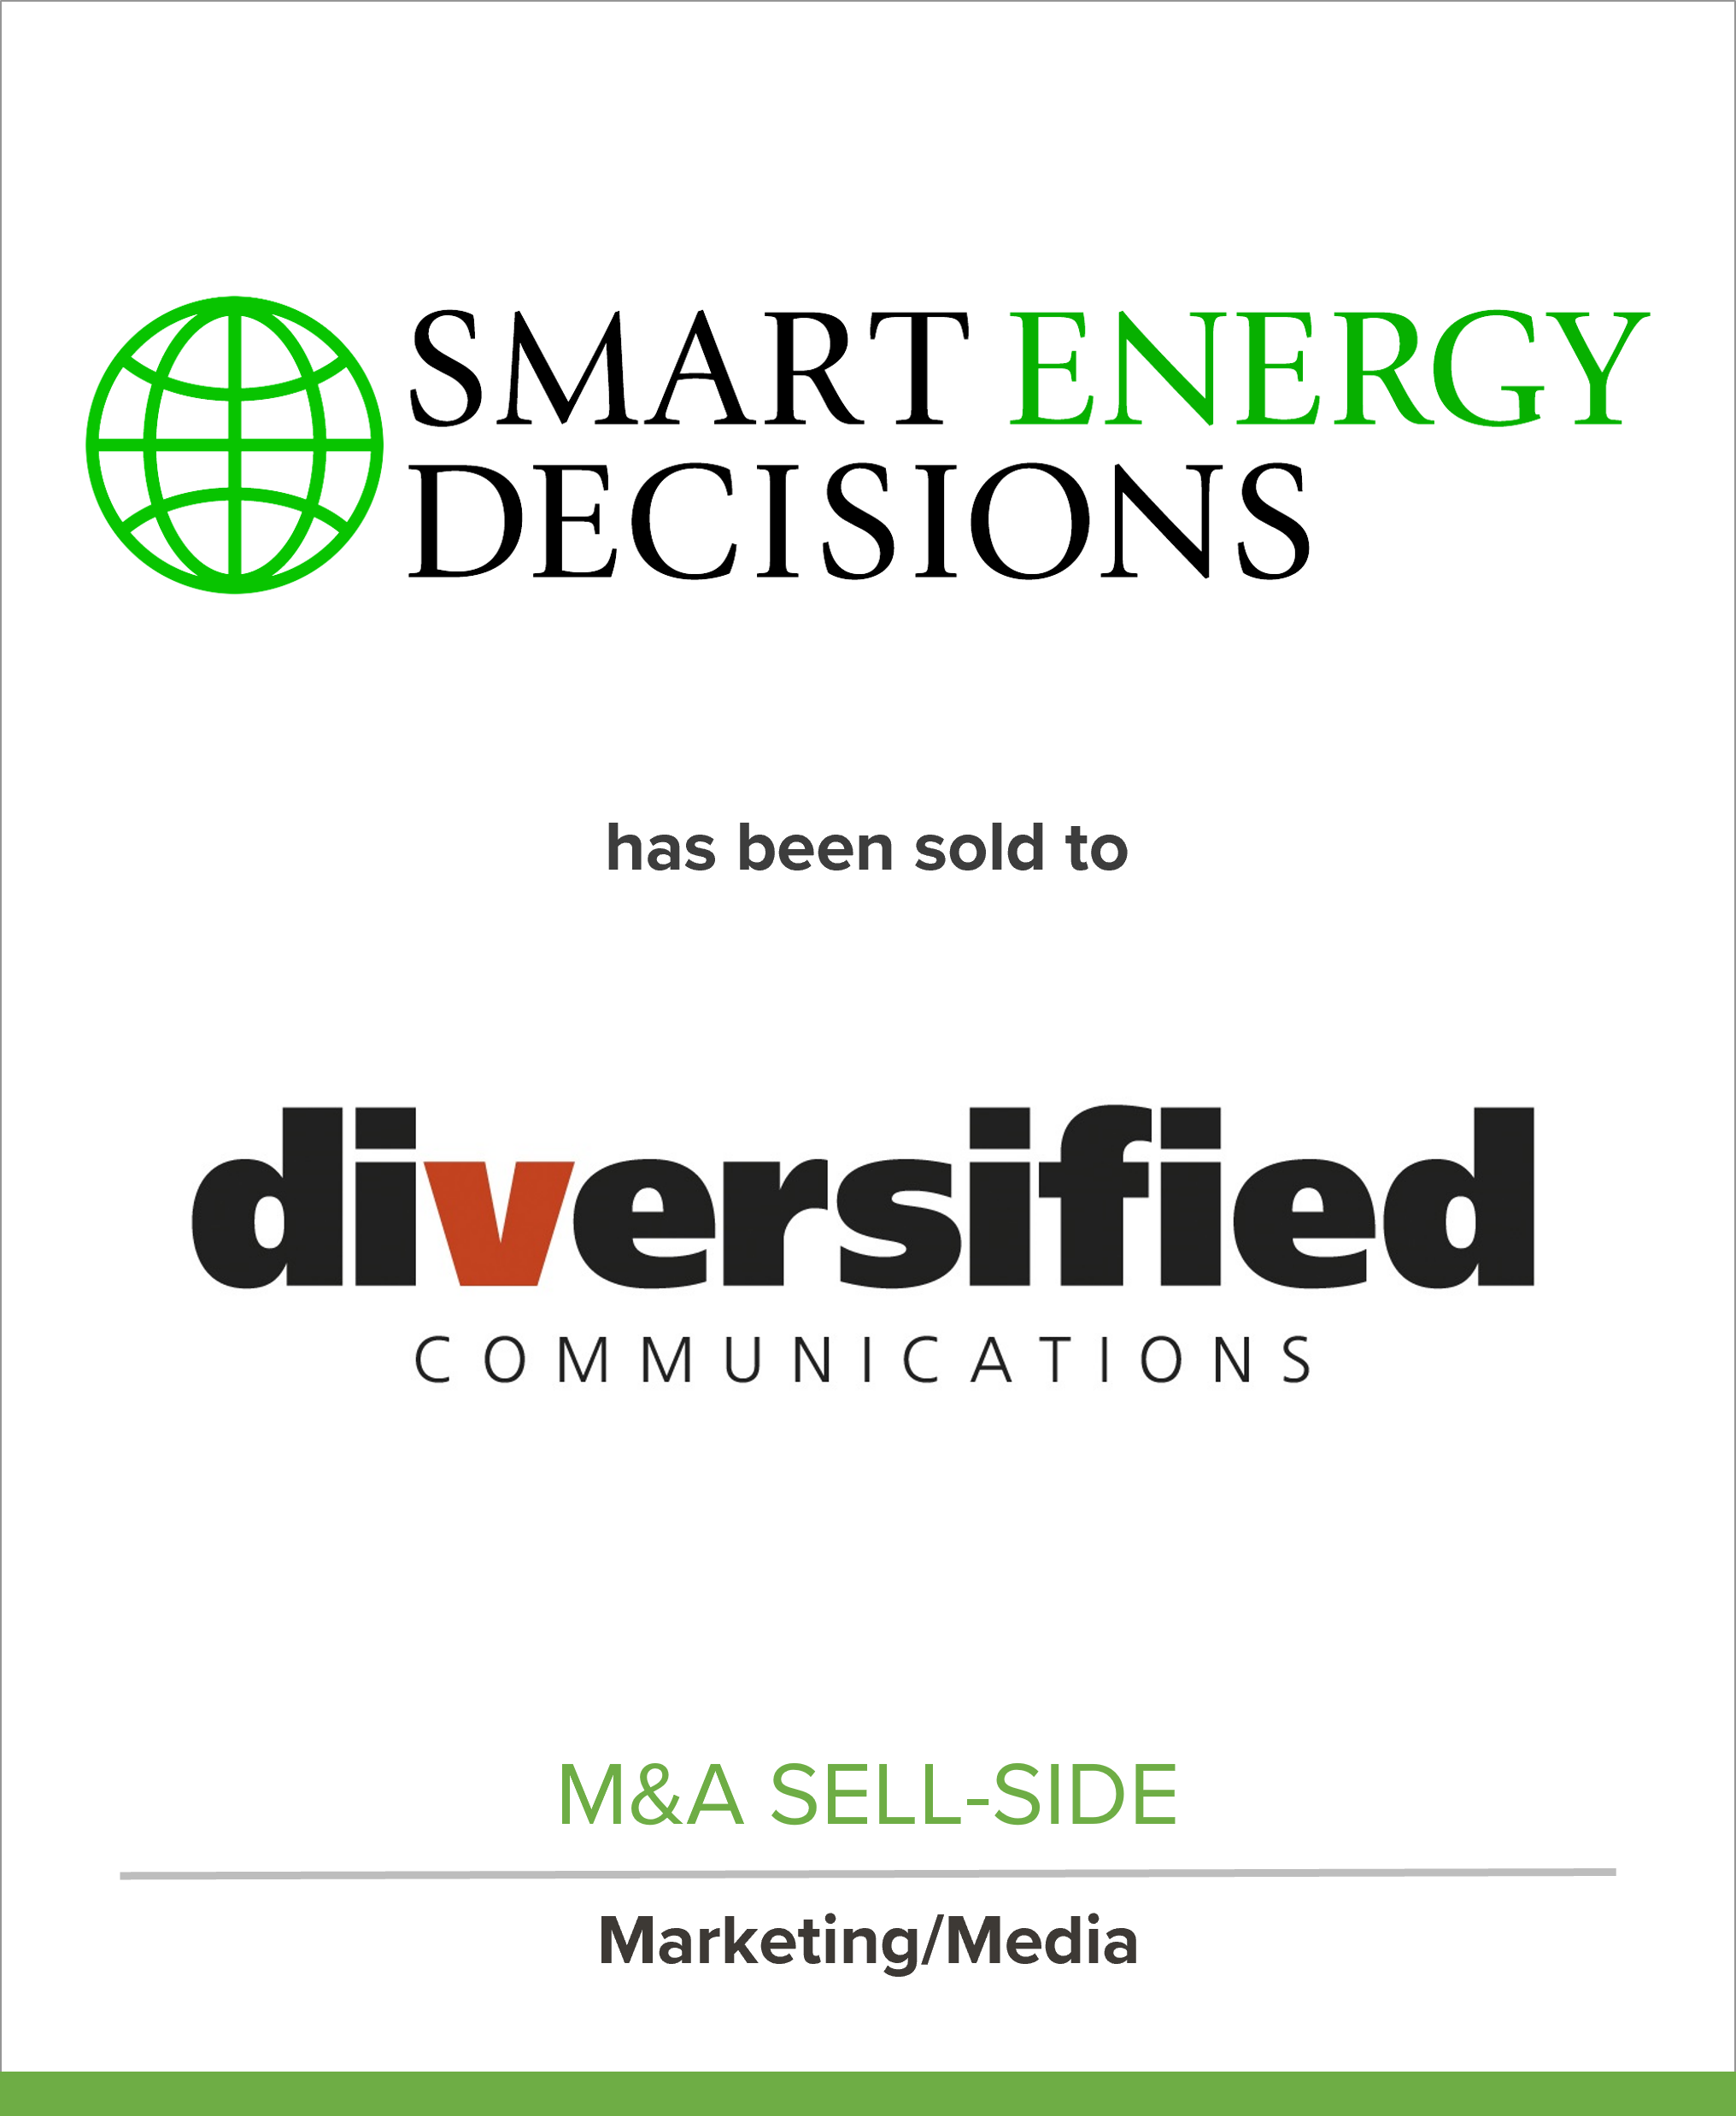 Smart Energy Decisions Has Been Sold to Diversified Communications